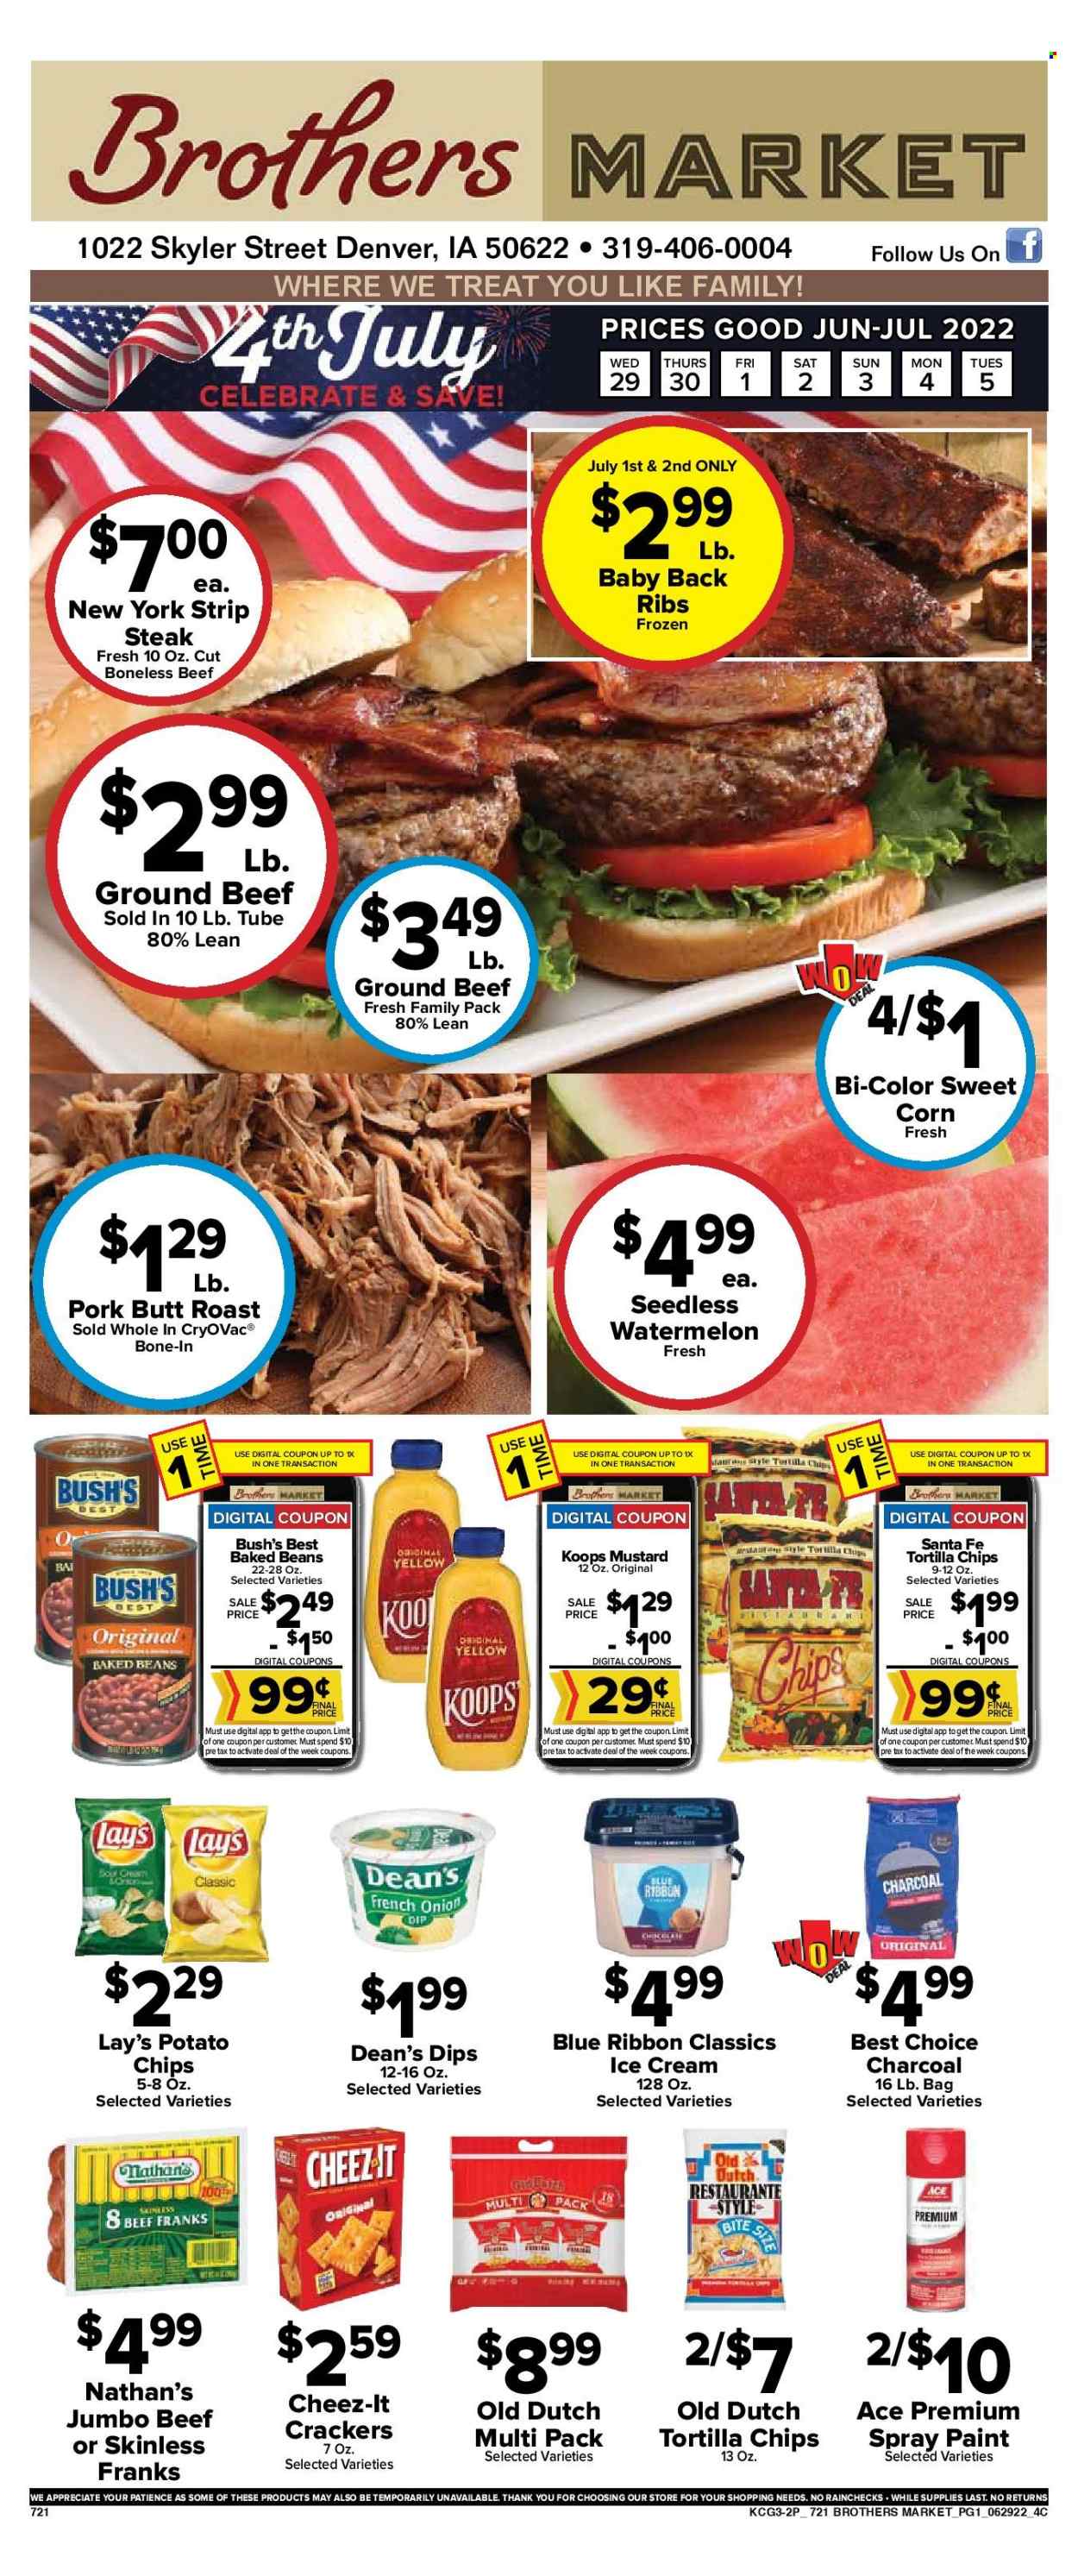 Brothers Market ad  - 06.29.2022 - 07.05.2022.